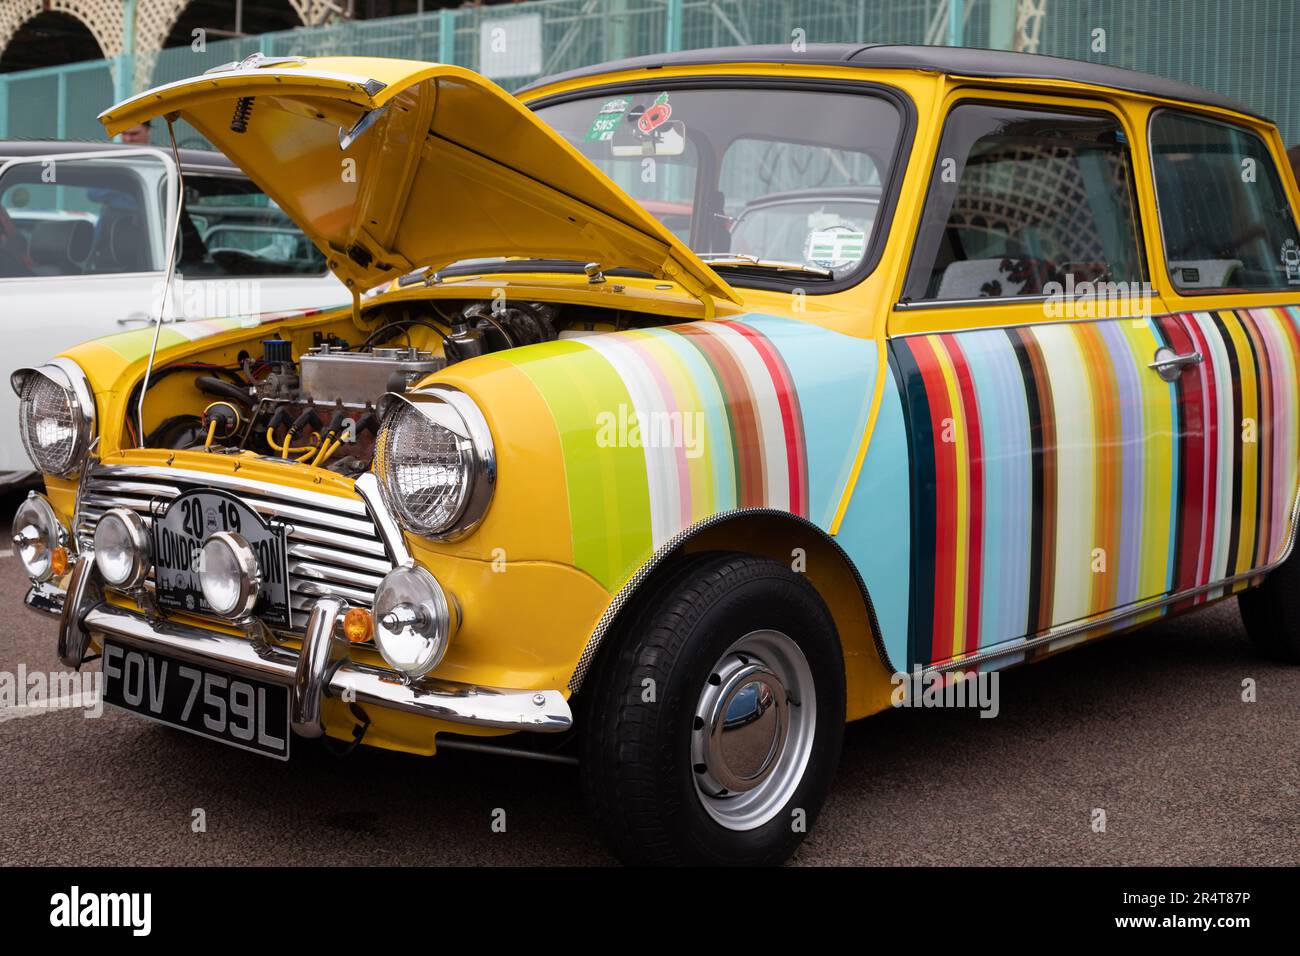 Brighton, UK - May 19 2019:  A beautiful painted striped Mini car is on display with an open bonnet at the London Brighton Mini Run 2019. Stock Photo